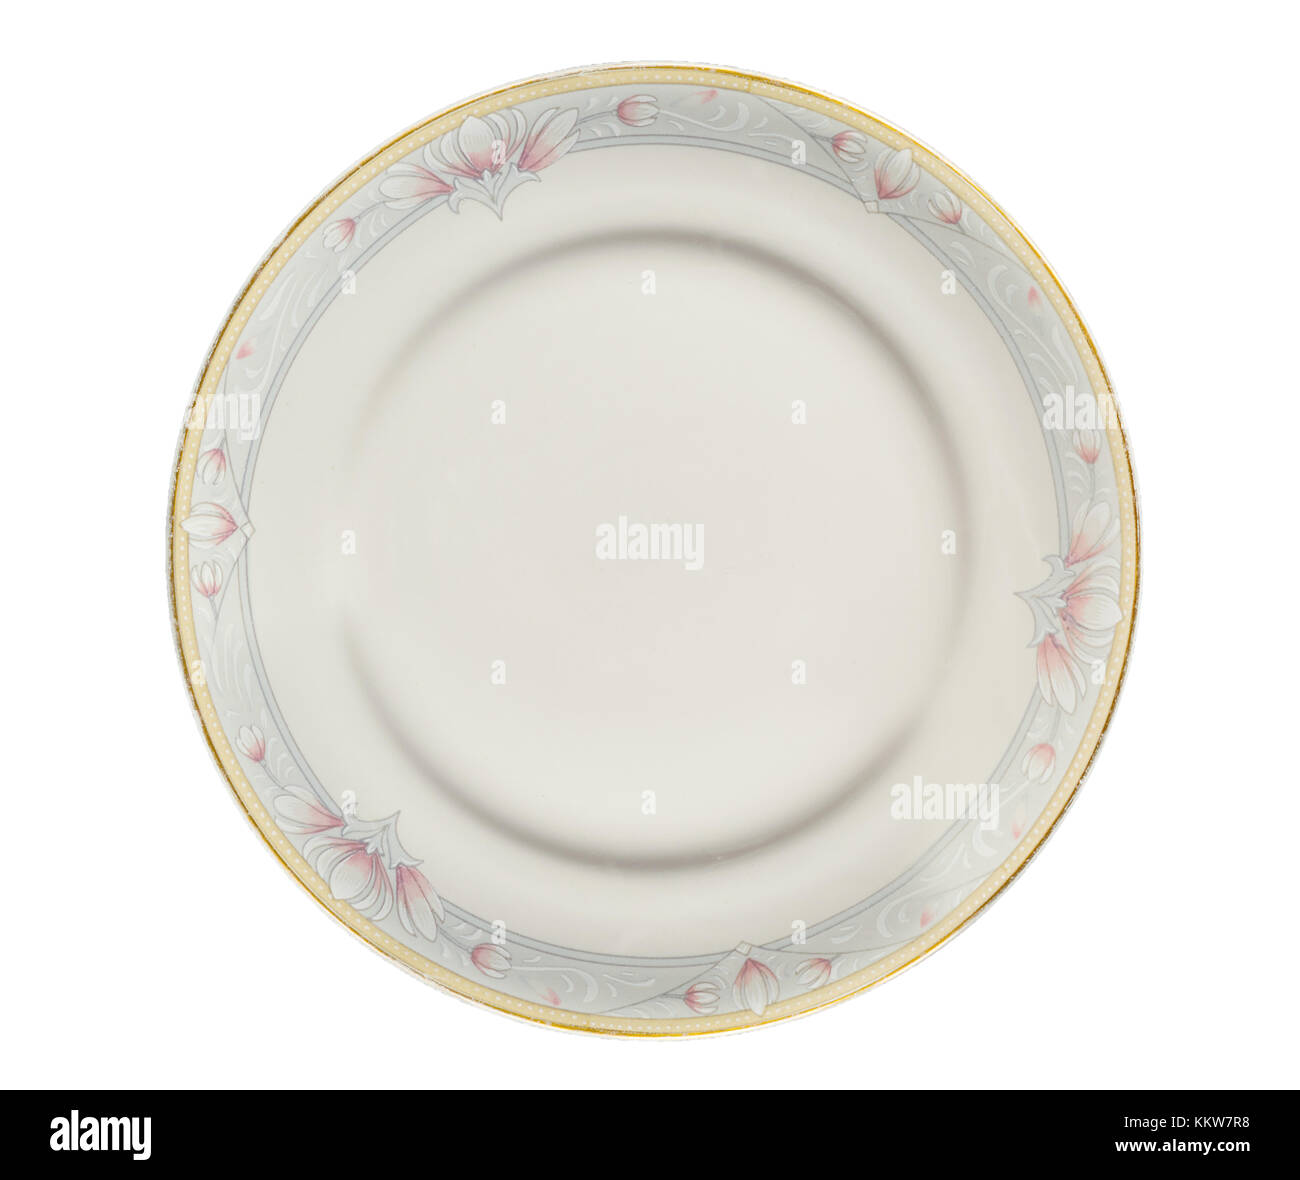 Porcelain or ceramic white plate, ordinary, with unique rose flower patterns, on a isolated white background Stock Photo